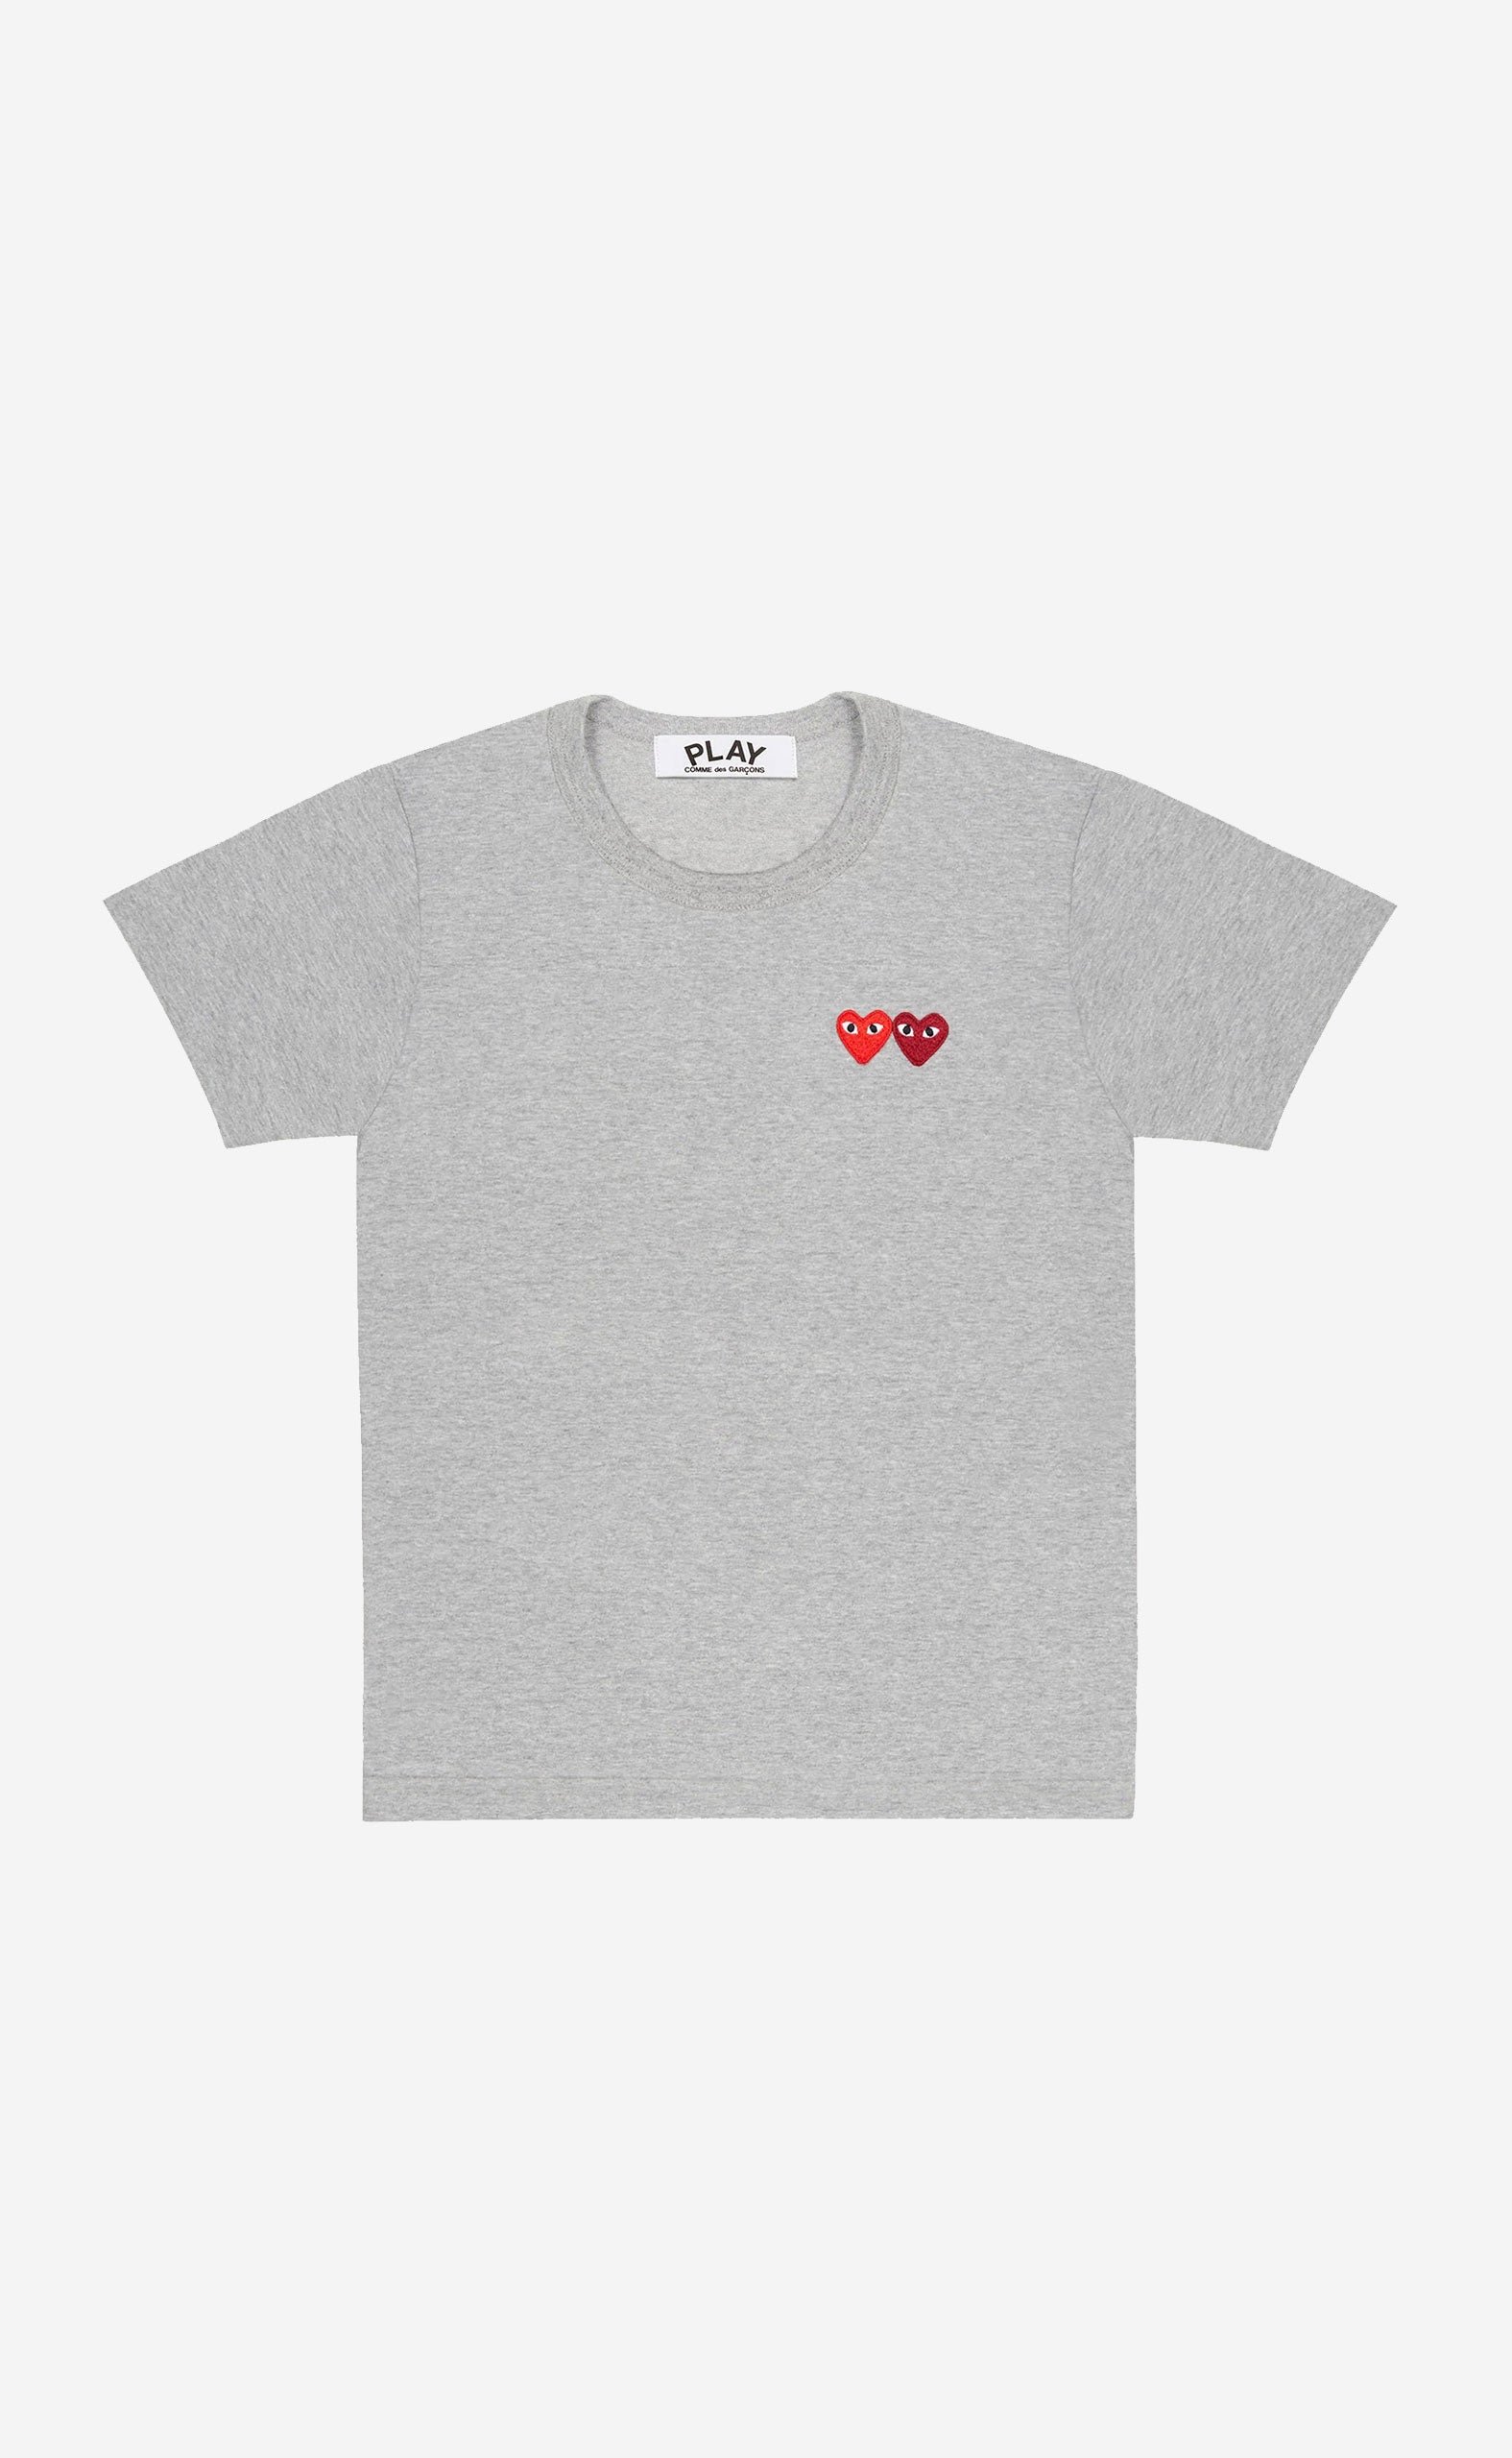 GREY PLAY COMME DES GARÇONS T-SHIRT WITH DOUBLE HEART